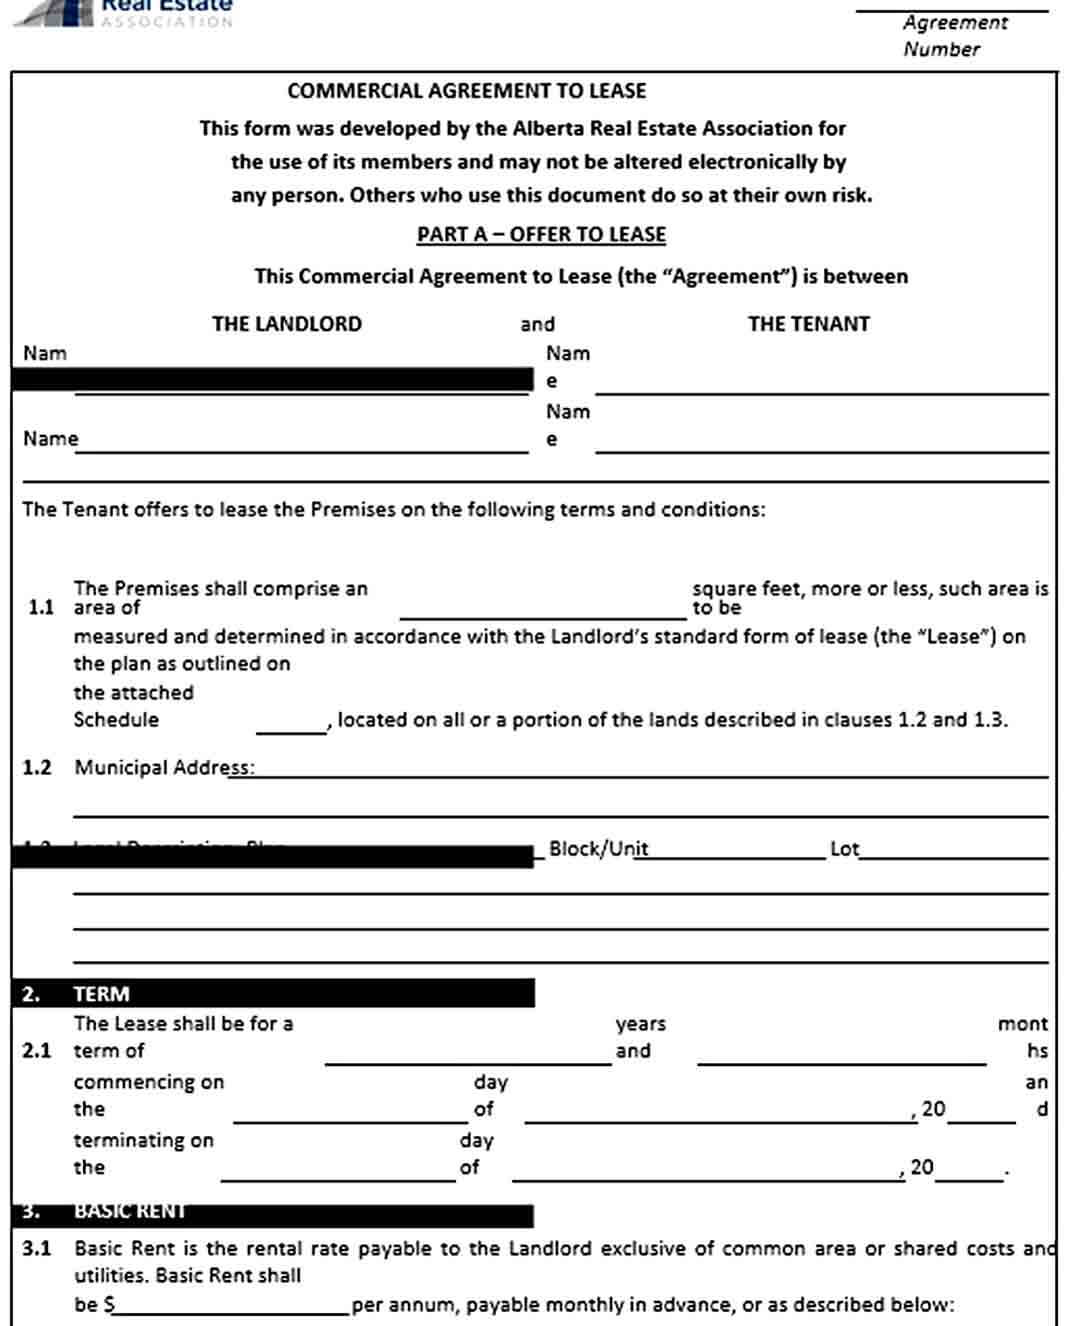 Sample Commercial Agreement to Lease Template